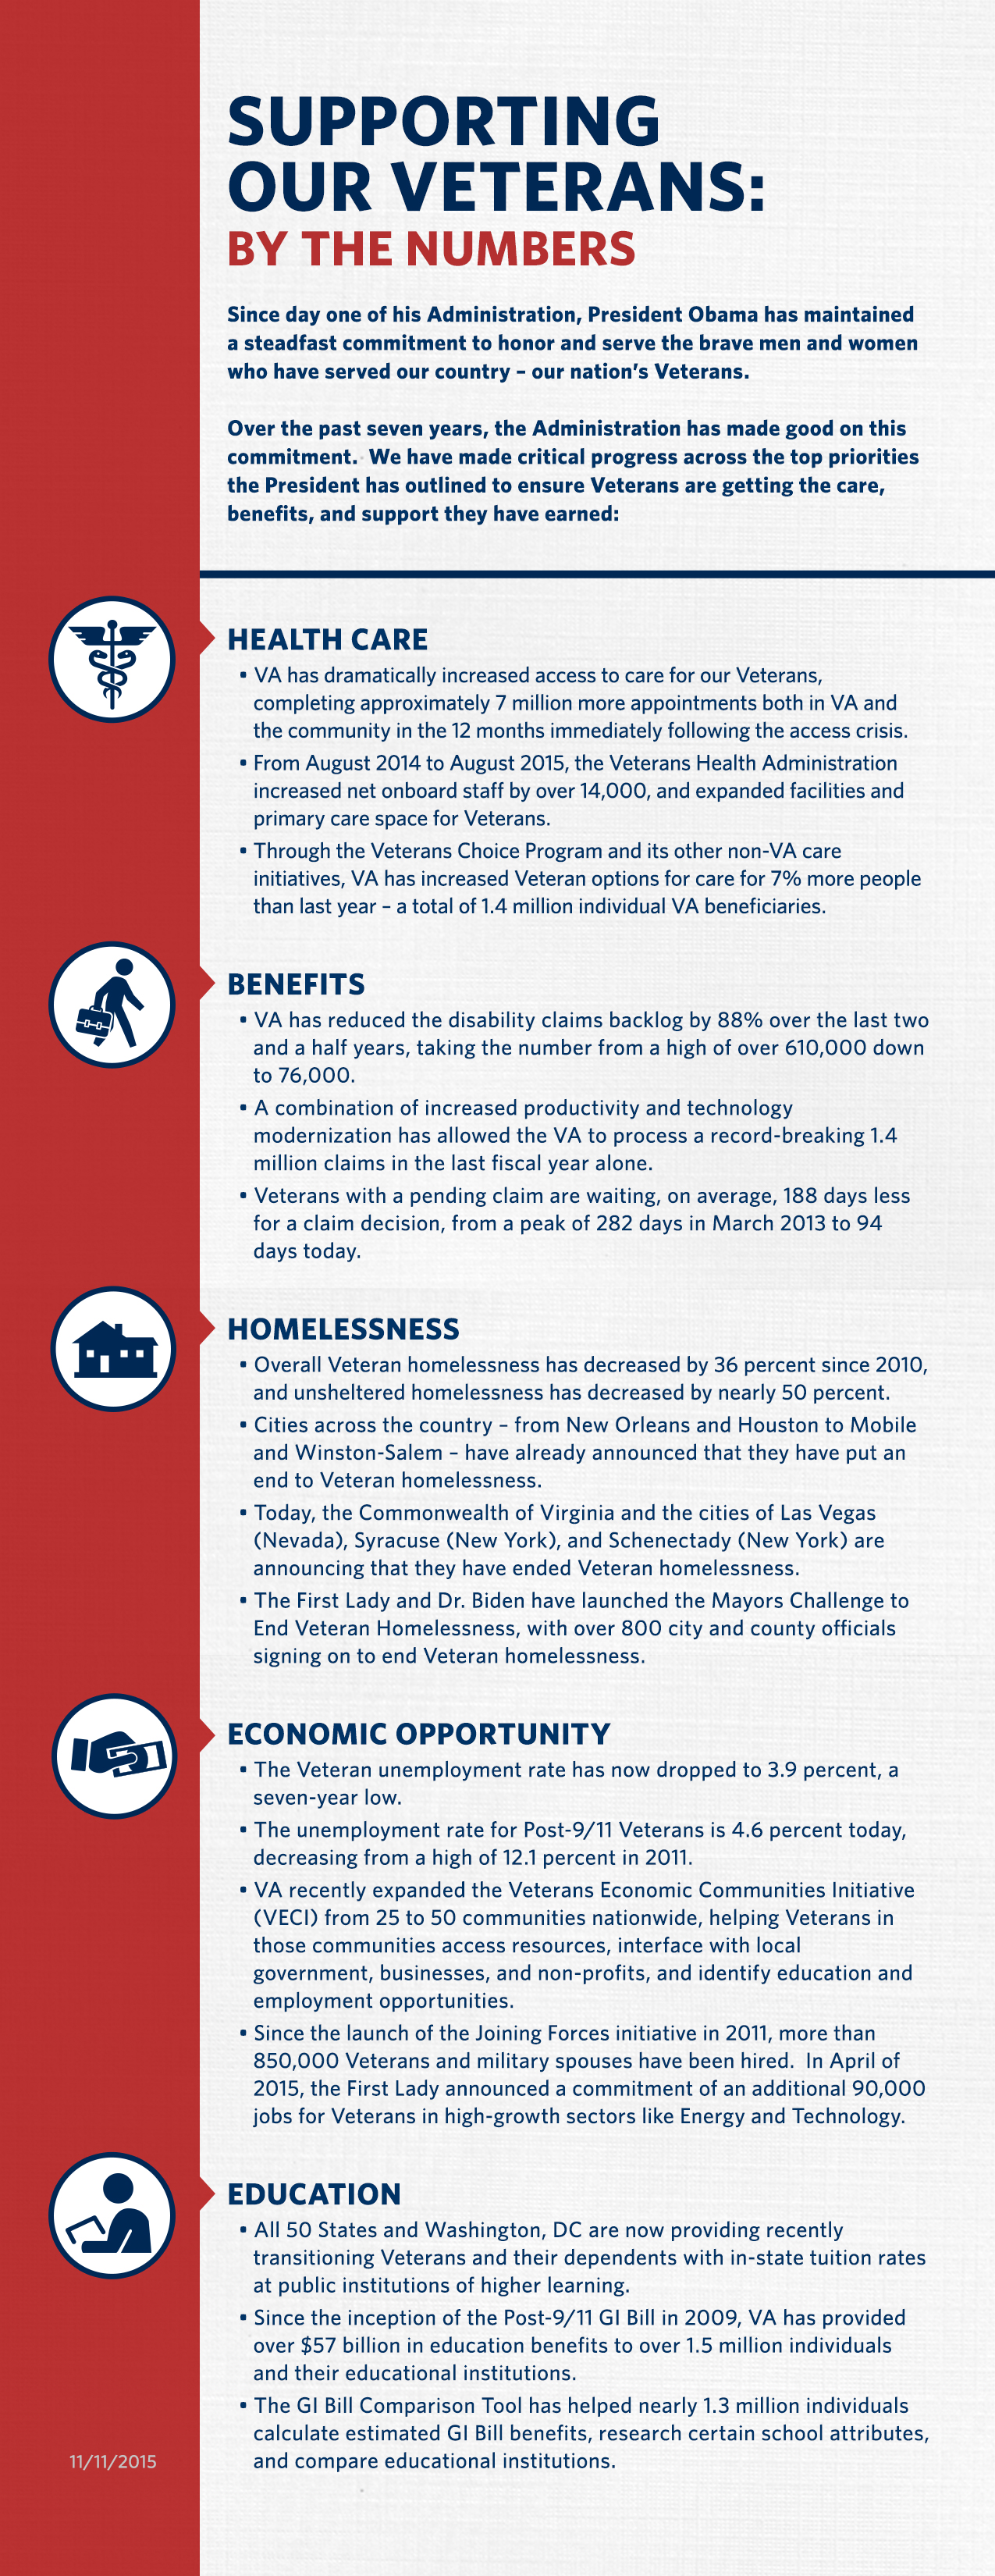 Supporting Our Nation's Veterans: By the Numbers